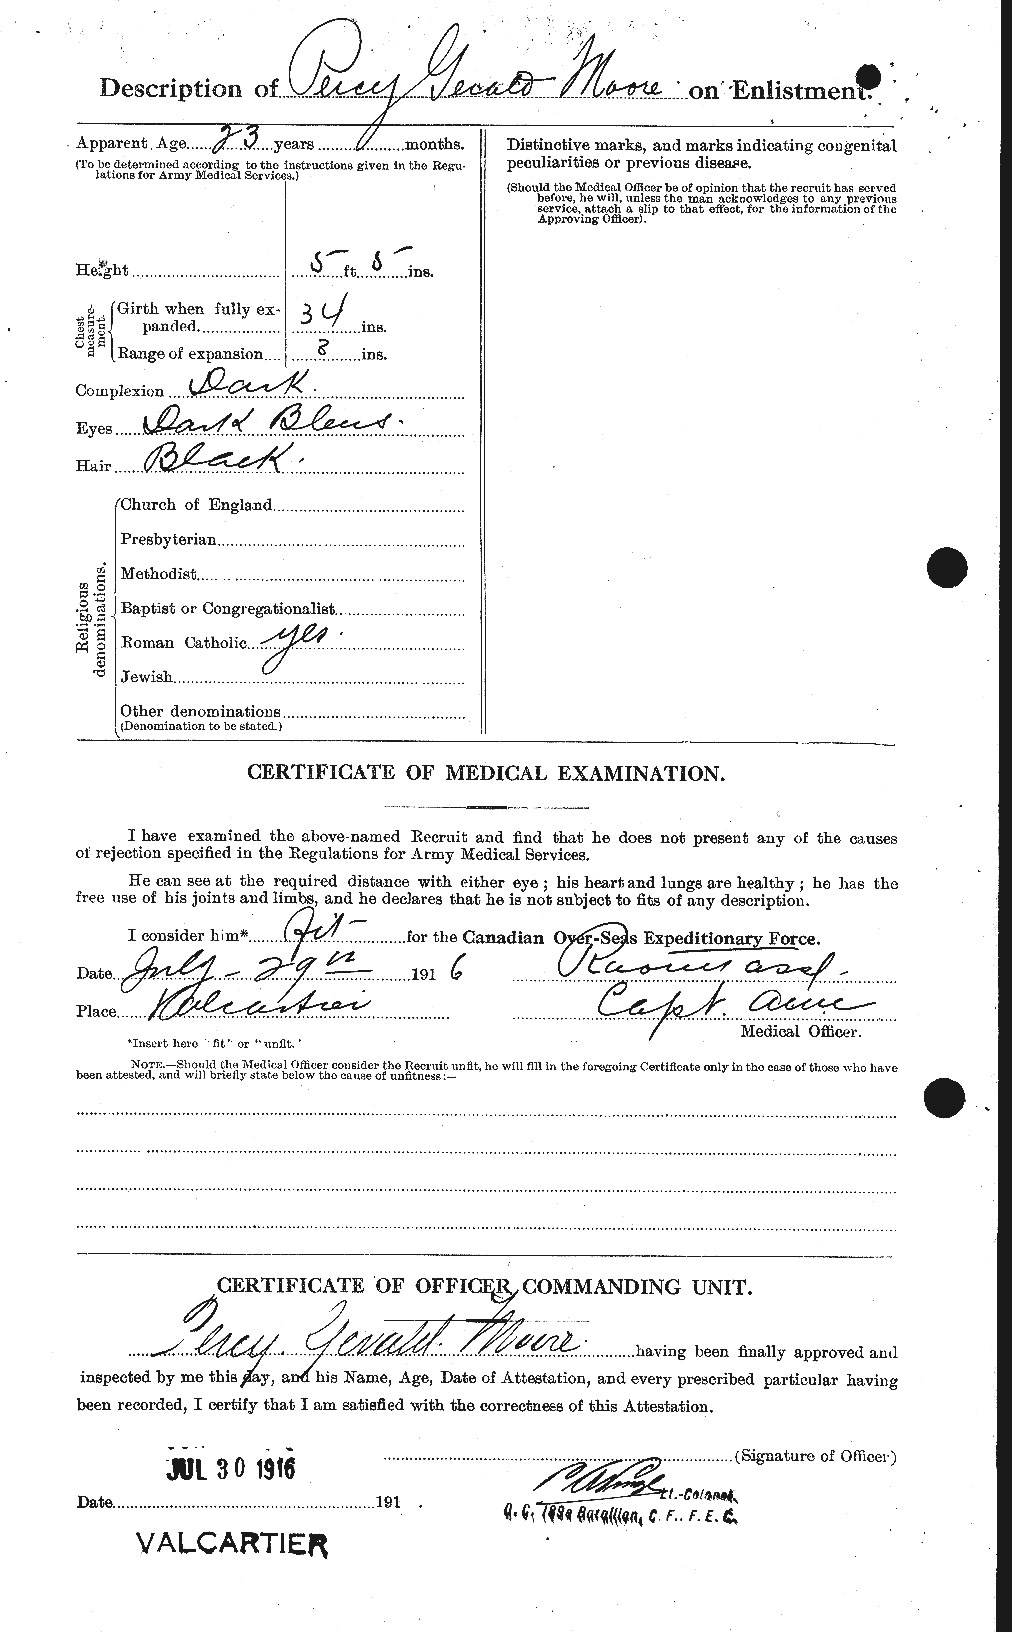 Personnel Records of the First World War - CEF 503486b